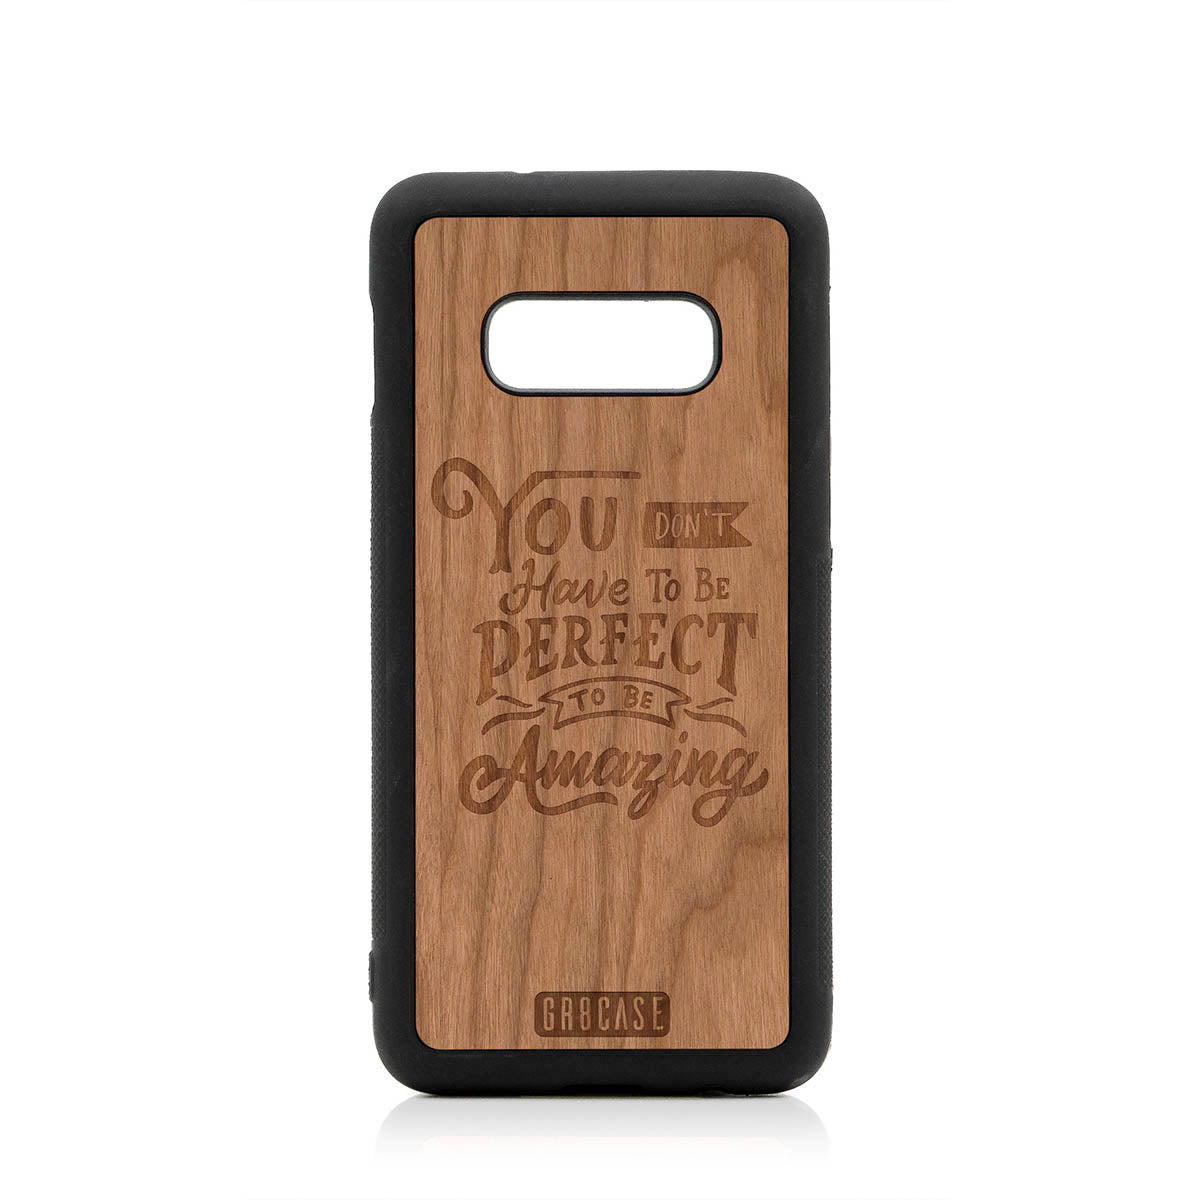 You Don't Have To Be Perfect To Be Amazing Design Wood Case For Samsung Galaxy S10E